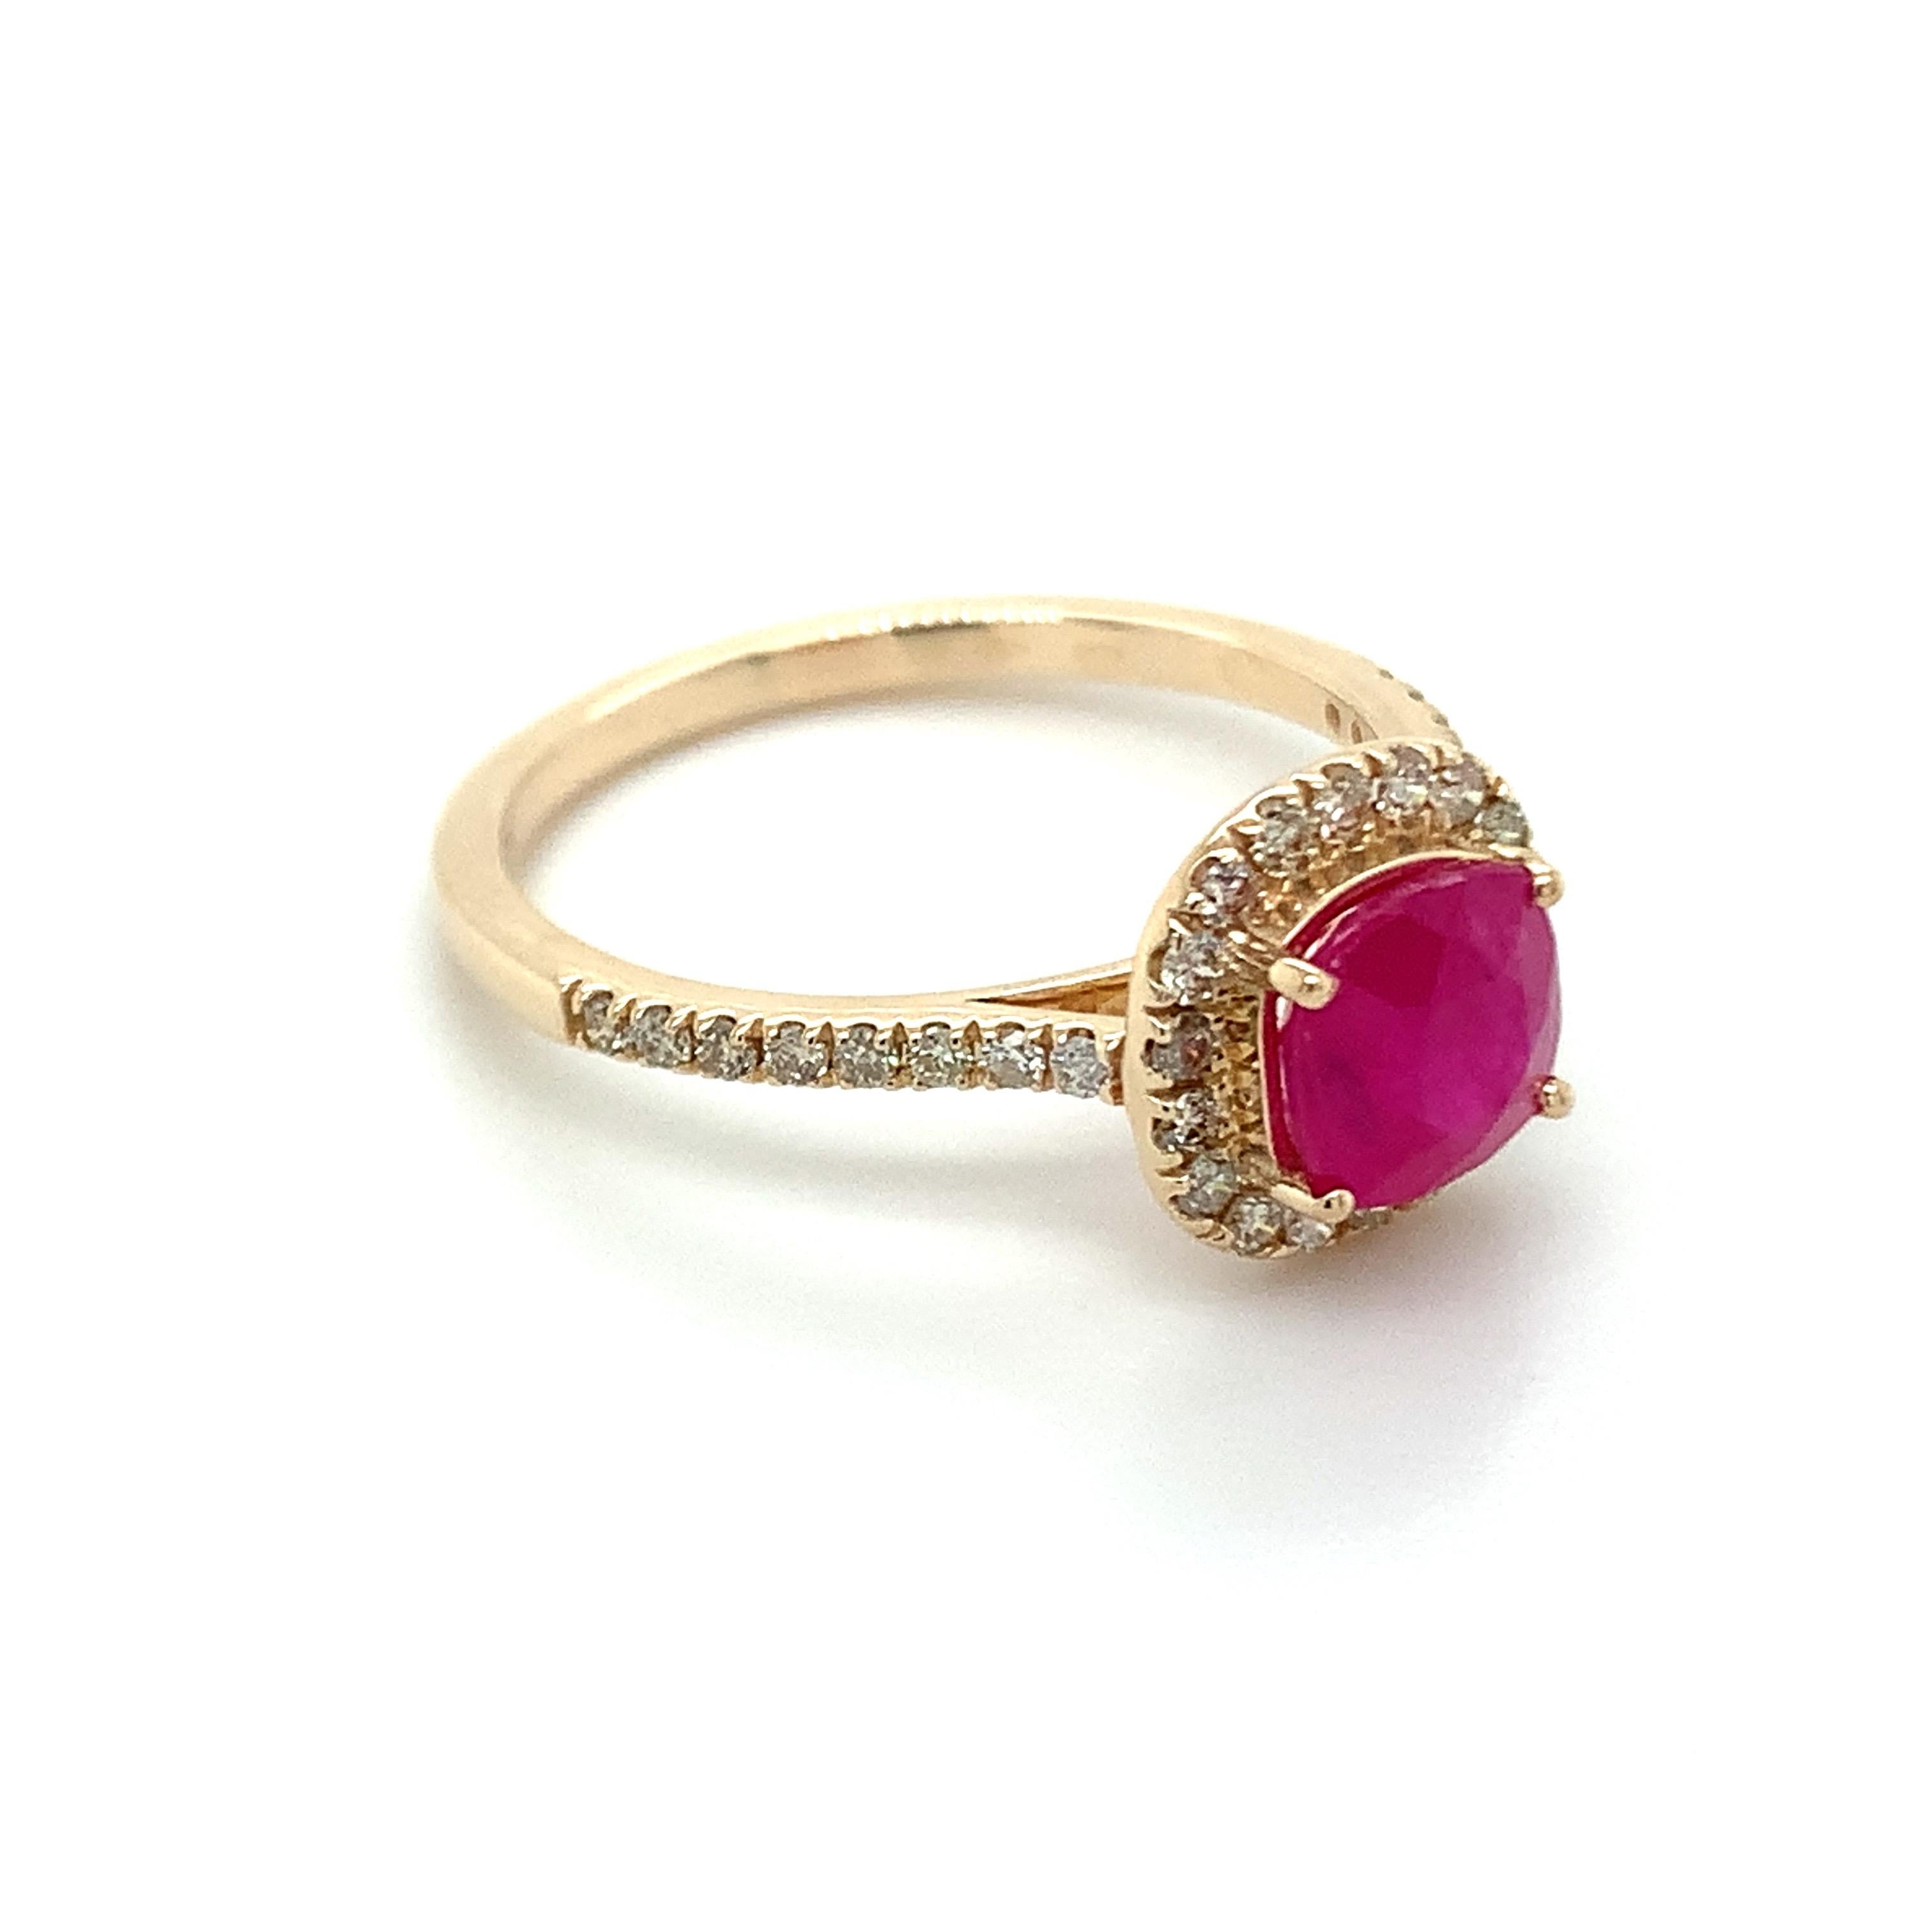 Cushion shape Ruby gemstone beautifully crafted in a 10K yellow gold ring with natural diamonds.

An exquisite red color birthstone for July. Believed to convey a status of power & wealth. Explore a vast range of precious stone Jewelry in our store.